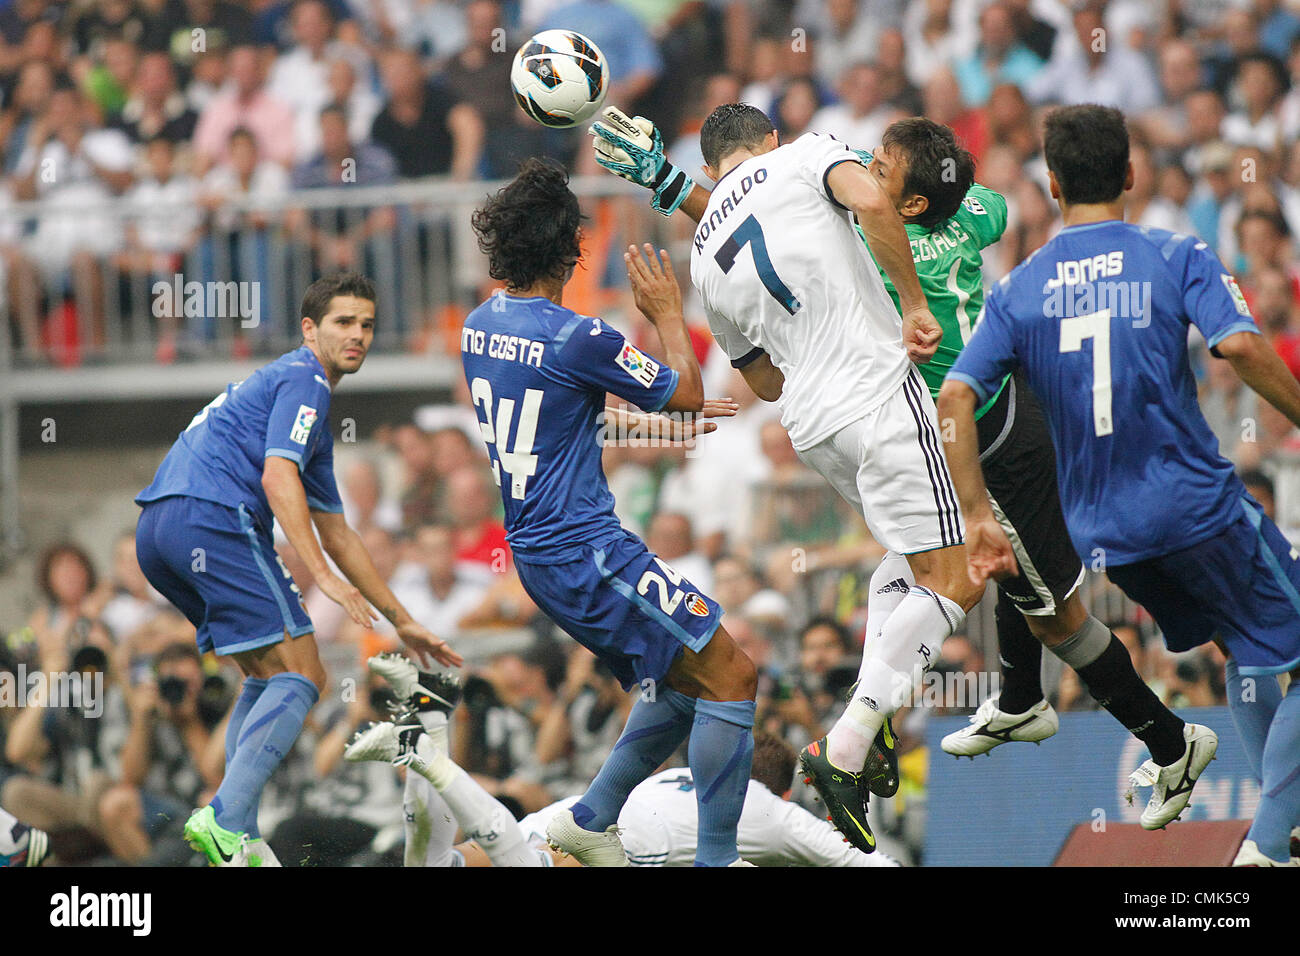 19/08/2012 - Spain Football, La Liga / Matchday 1 - Real Madrid vs. Valencia CF - Bruno Alves touches the ball with his hand while jumping to stop it Stock Photo